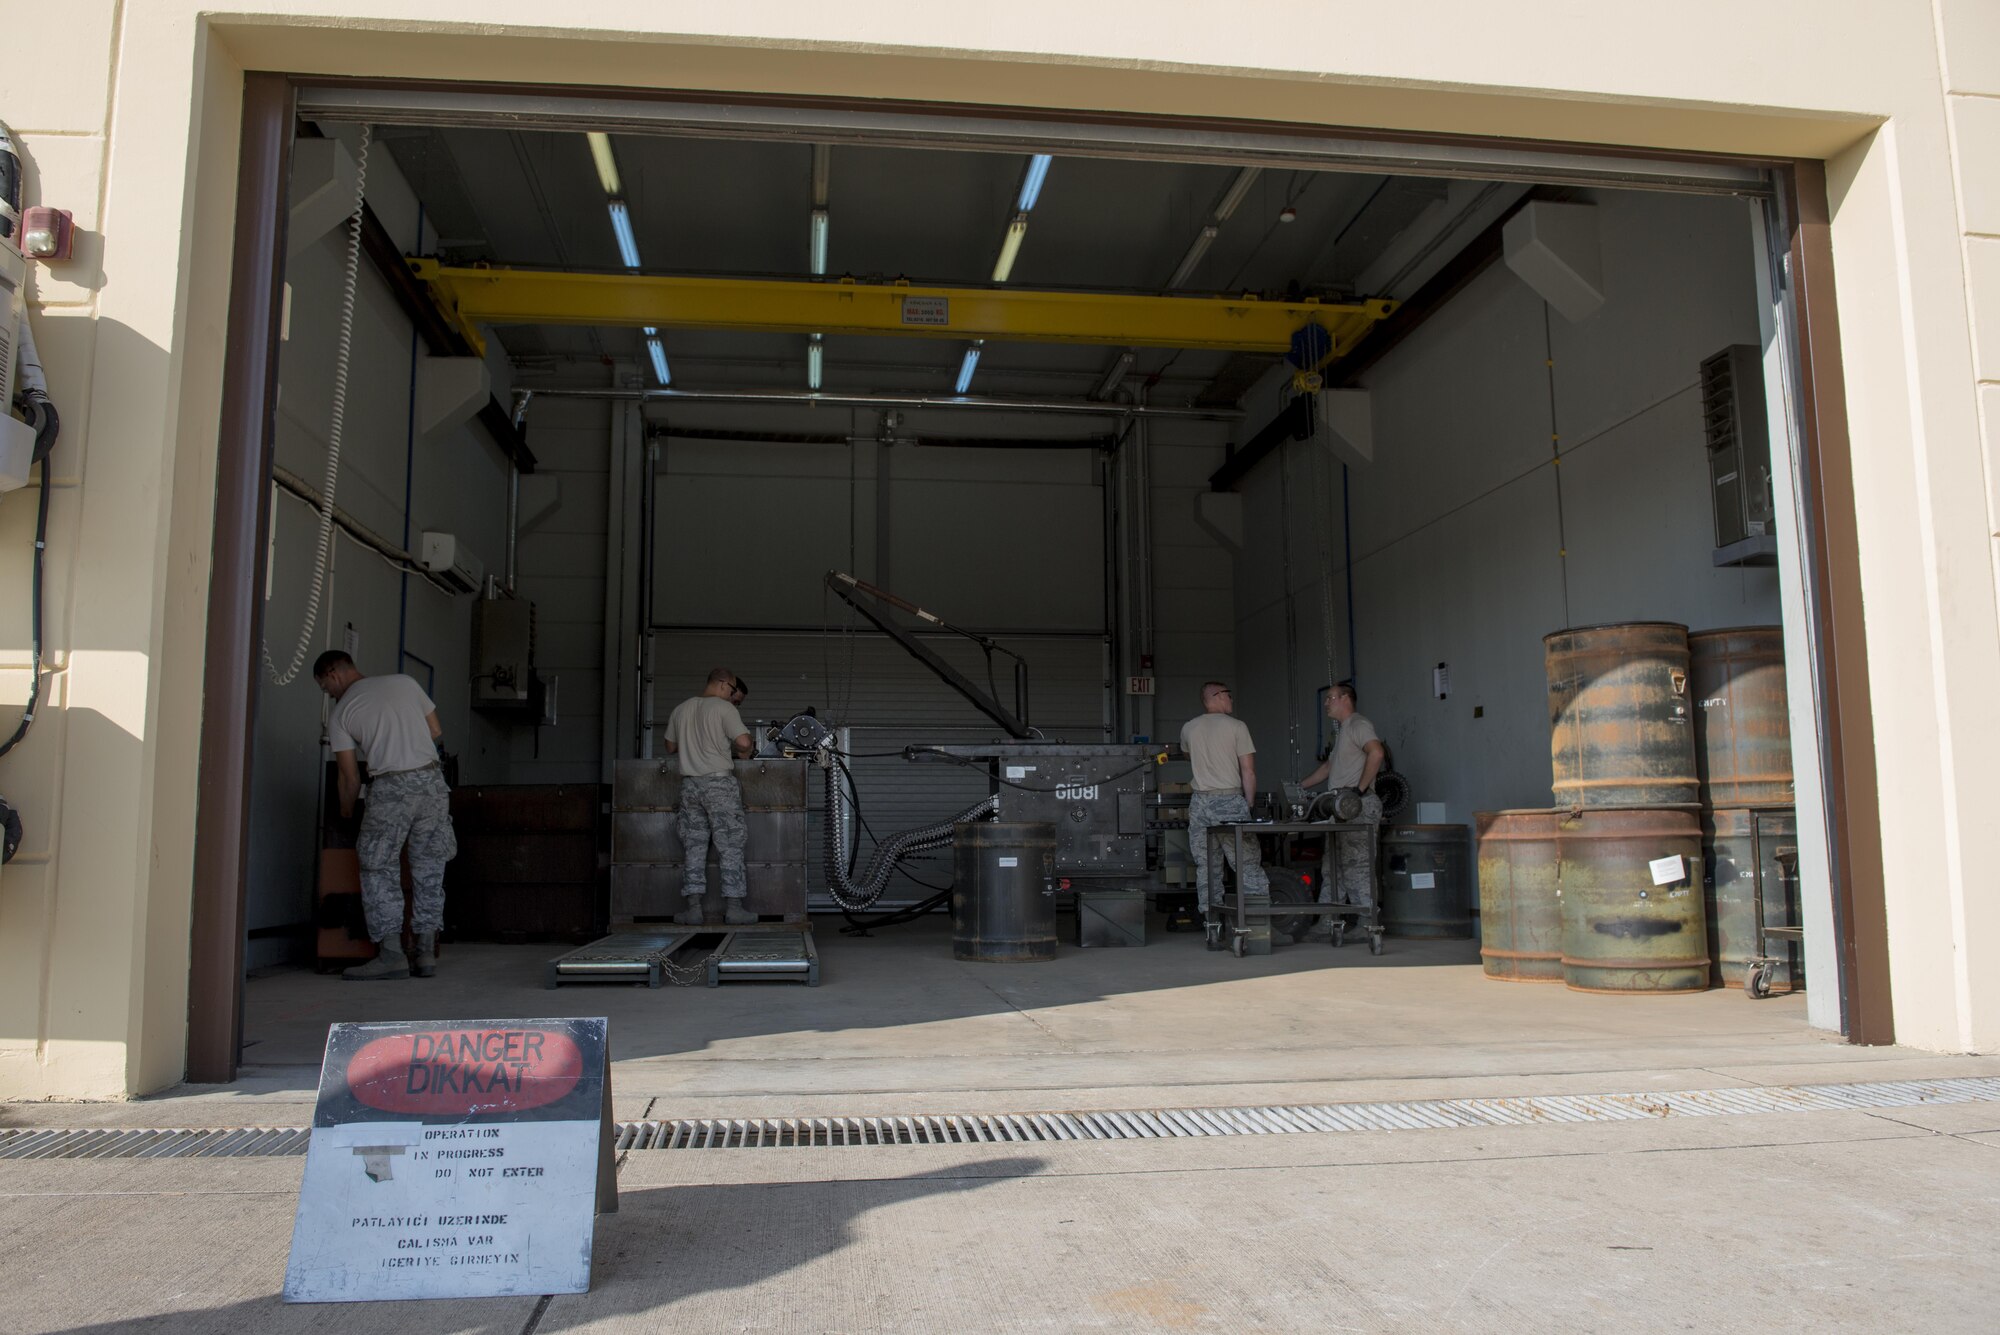 U.S. Airmen assigned to the 447th Expeditionary Aircraft Maintenance Squadron process 30mm rounds on a conveyer belt Sept. 8, 2016, at Incirlik Air Base, Turkey. The rounds are accounted for, secured and stored for future use. (U.S. Air Force photo by Senior Airman John Nieves Camacho)